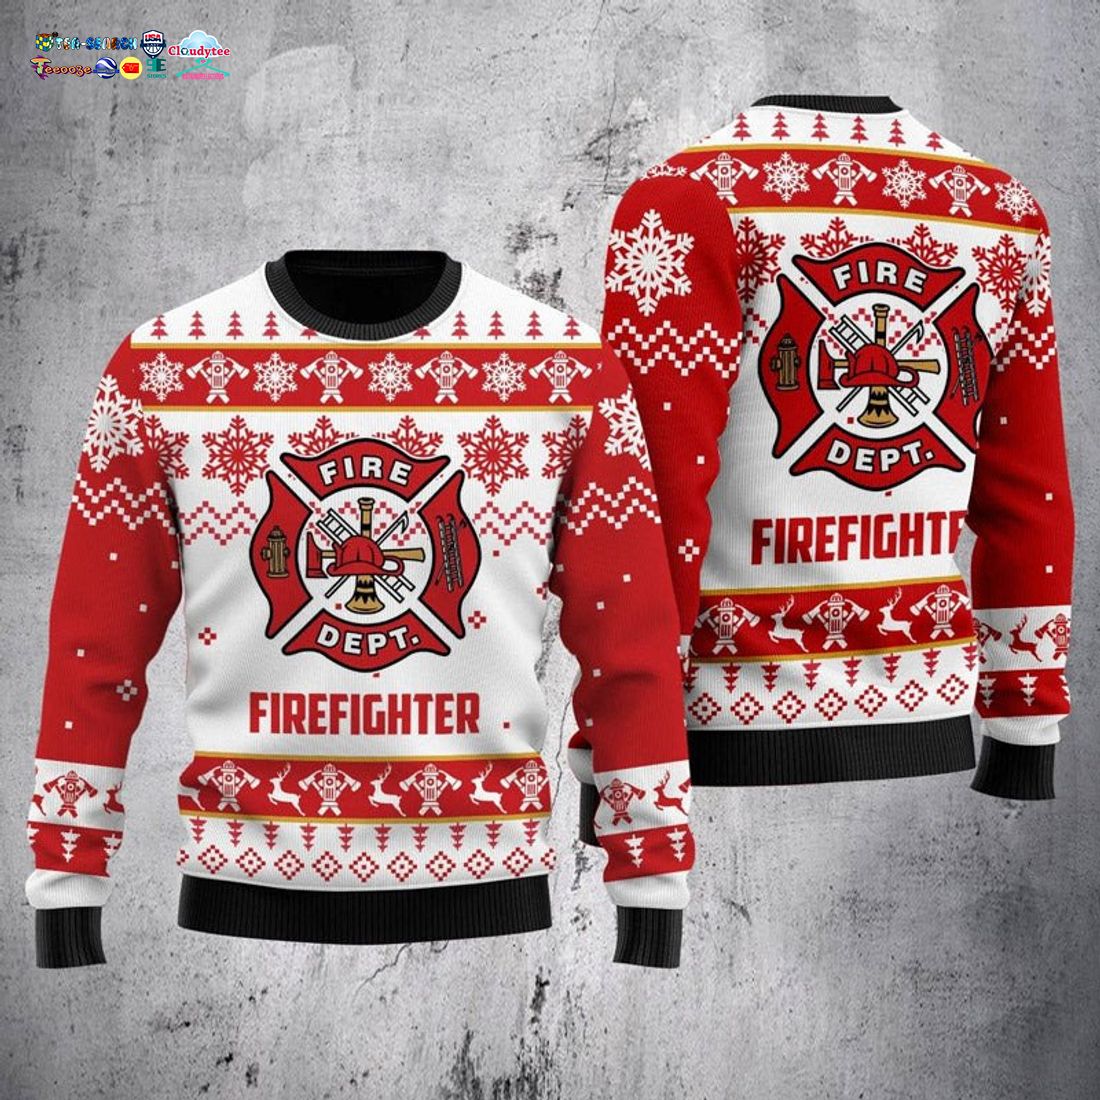 Firefighter Fire Department Ugly Christmas Sweater - Nice shot bro